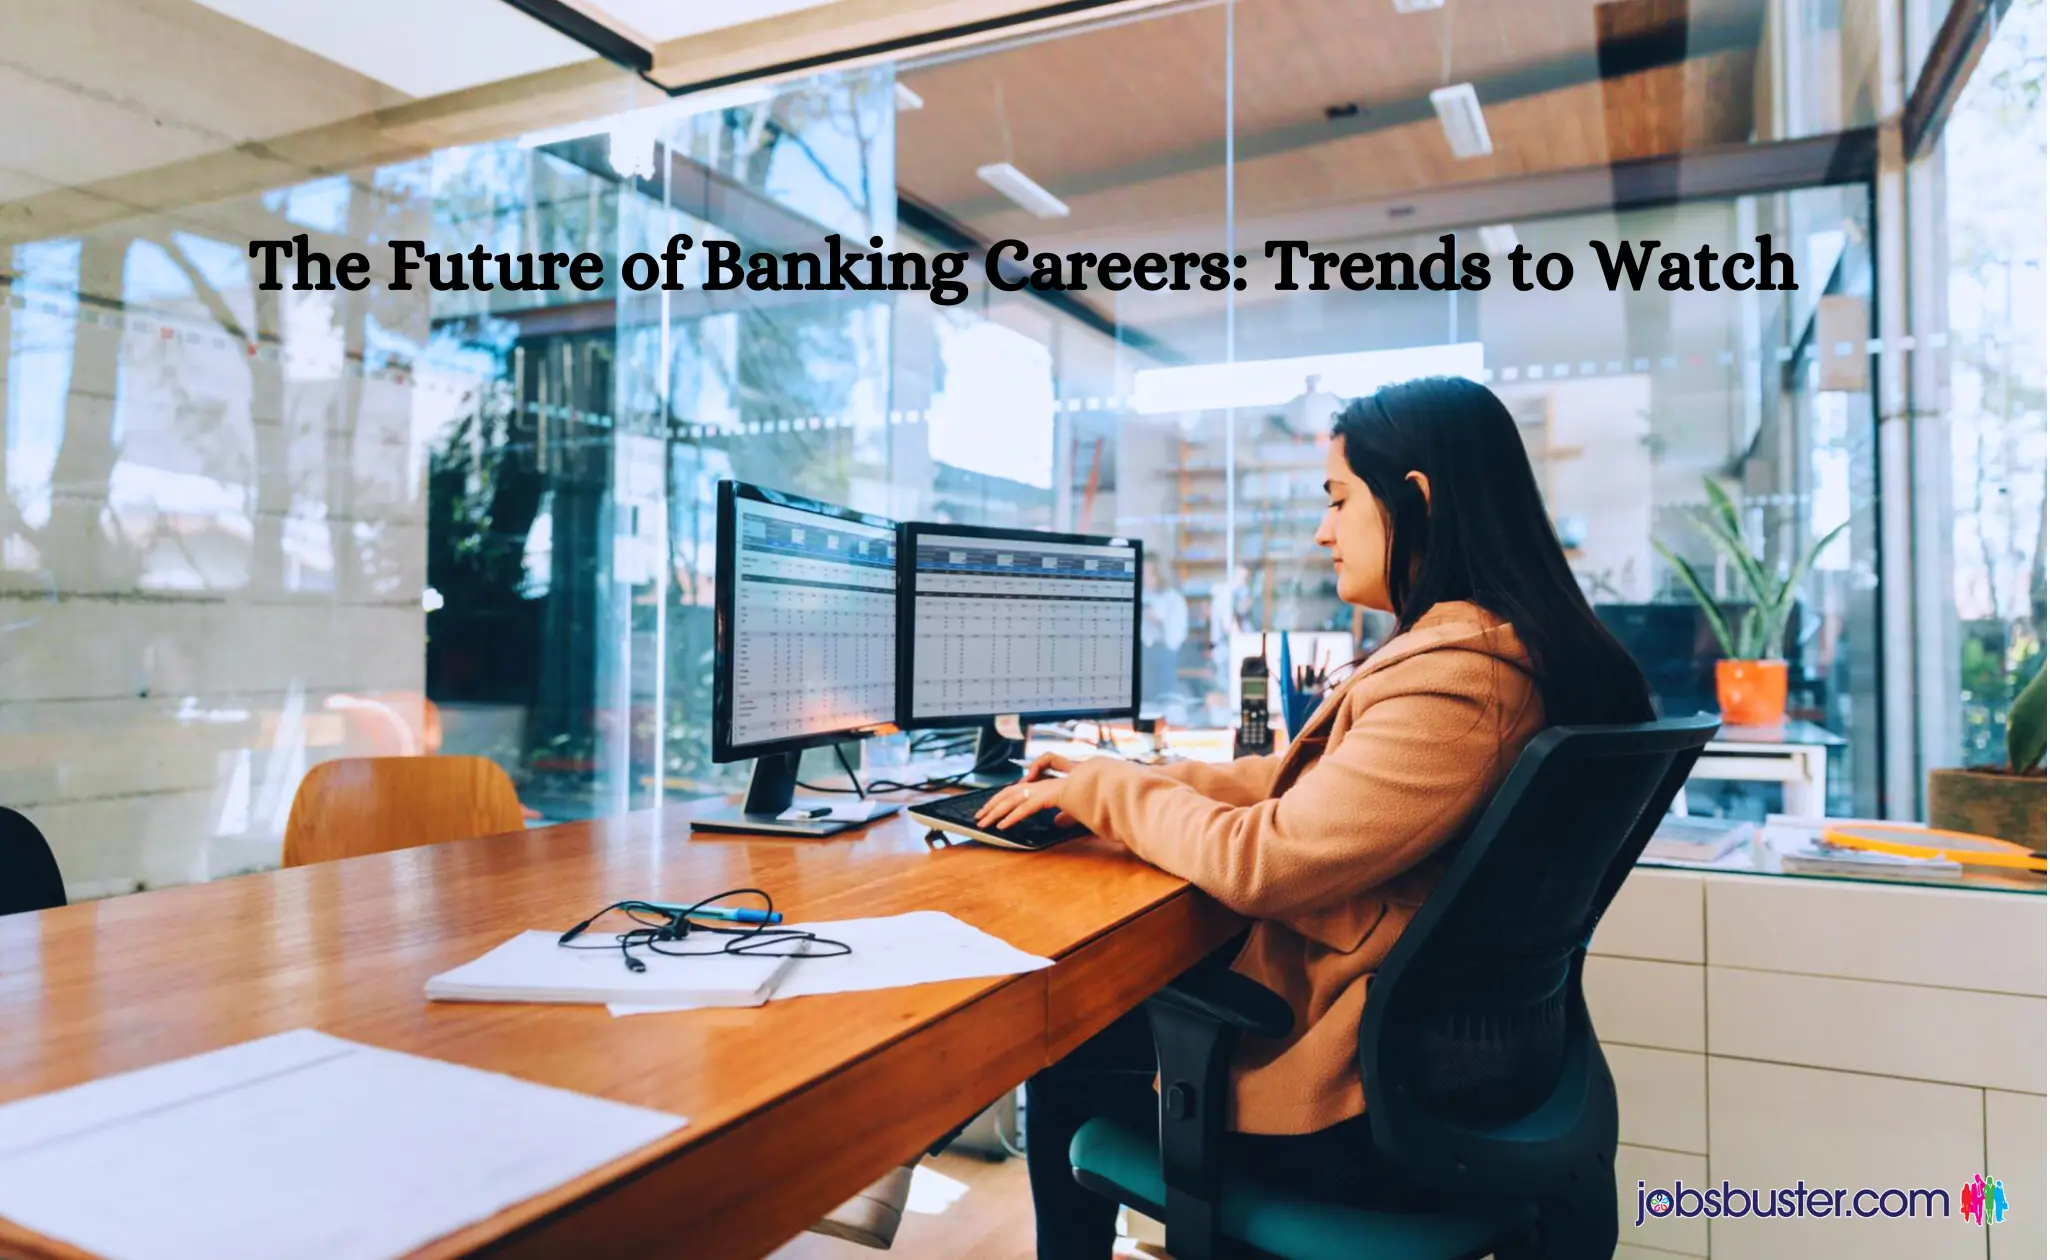 The Future of Banking Careers: Trends to Watch